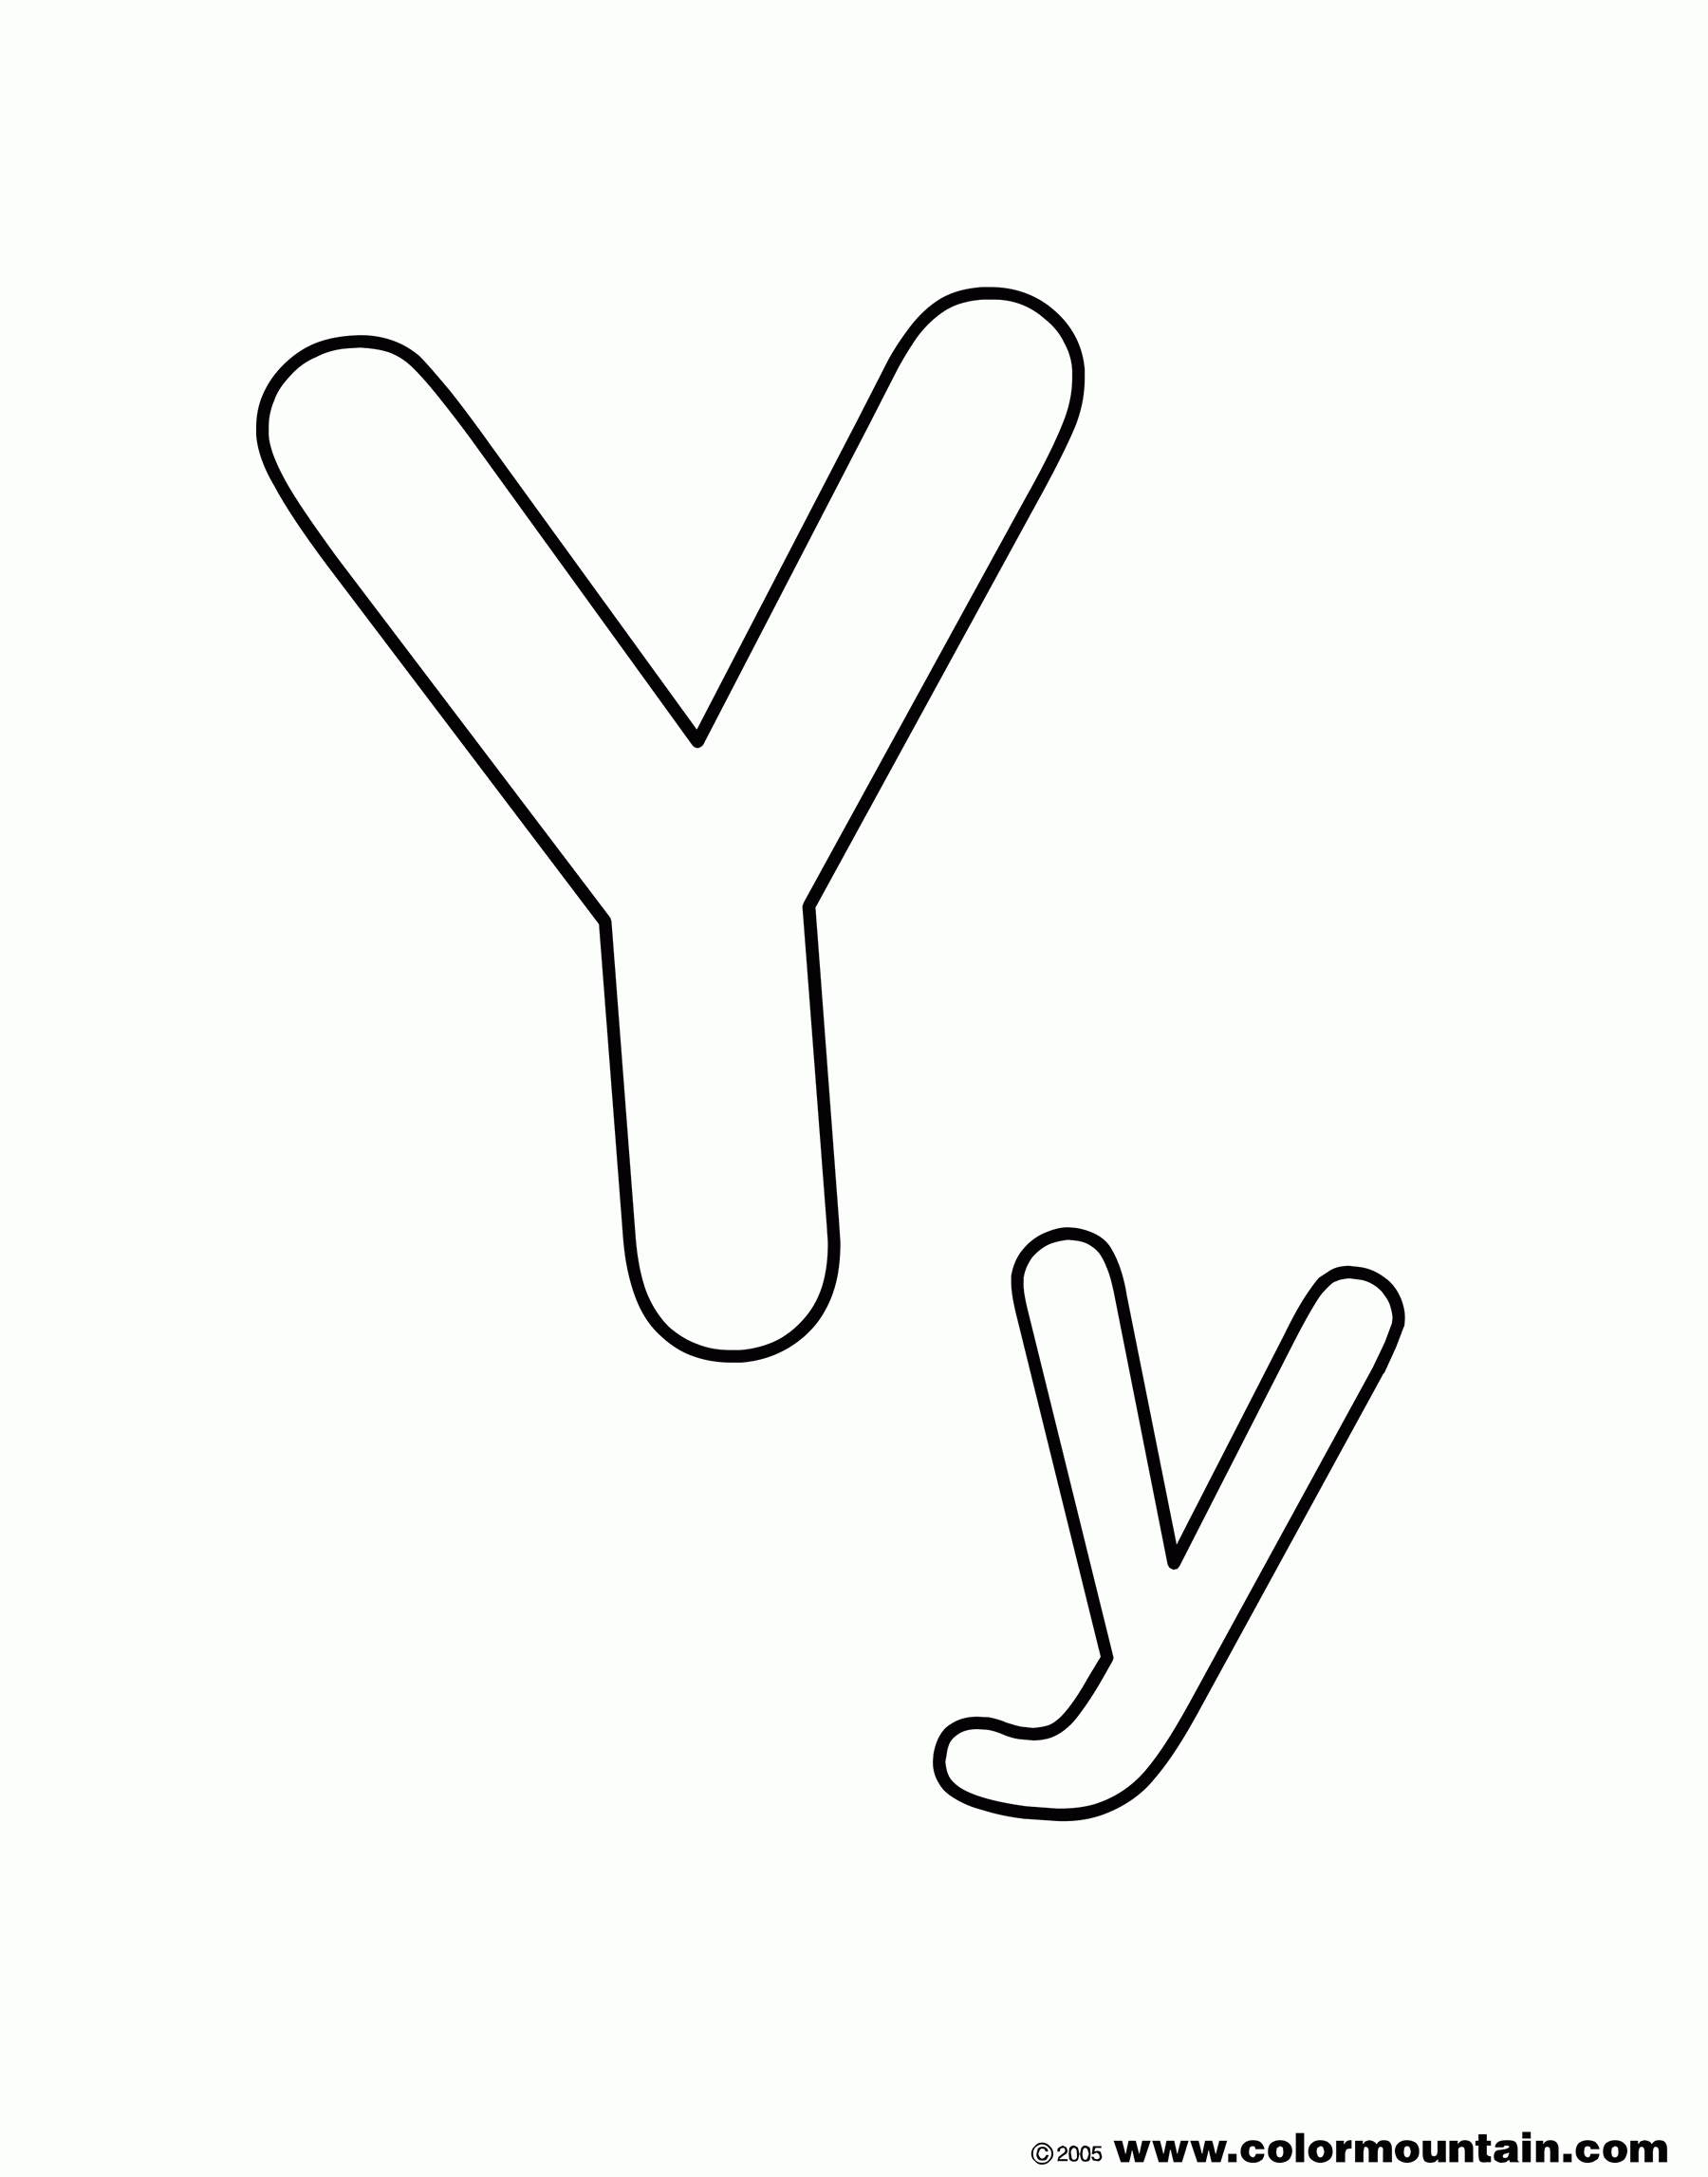 The Letter Y Coloring Pages - Coloring Home